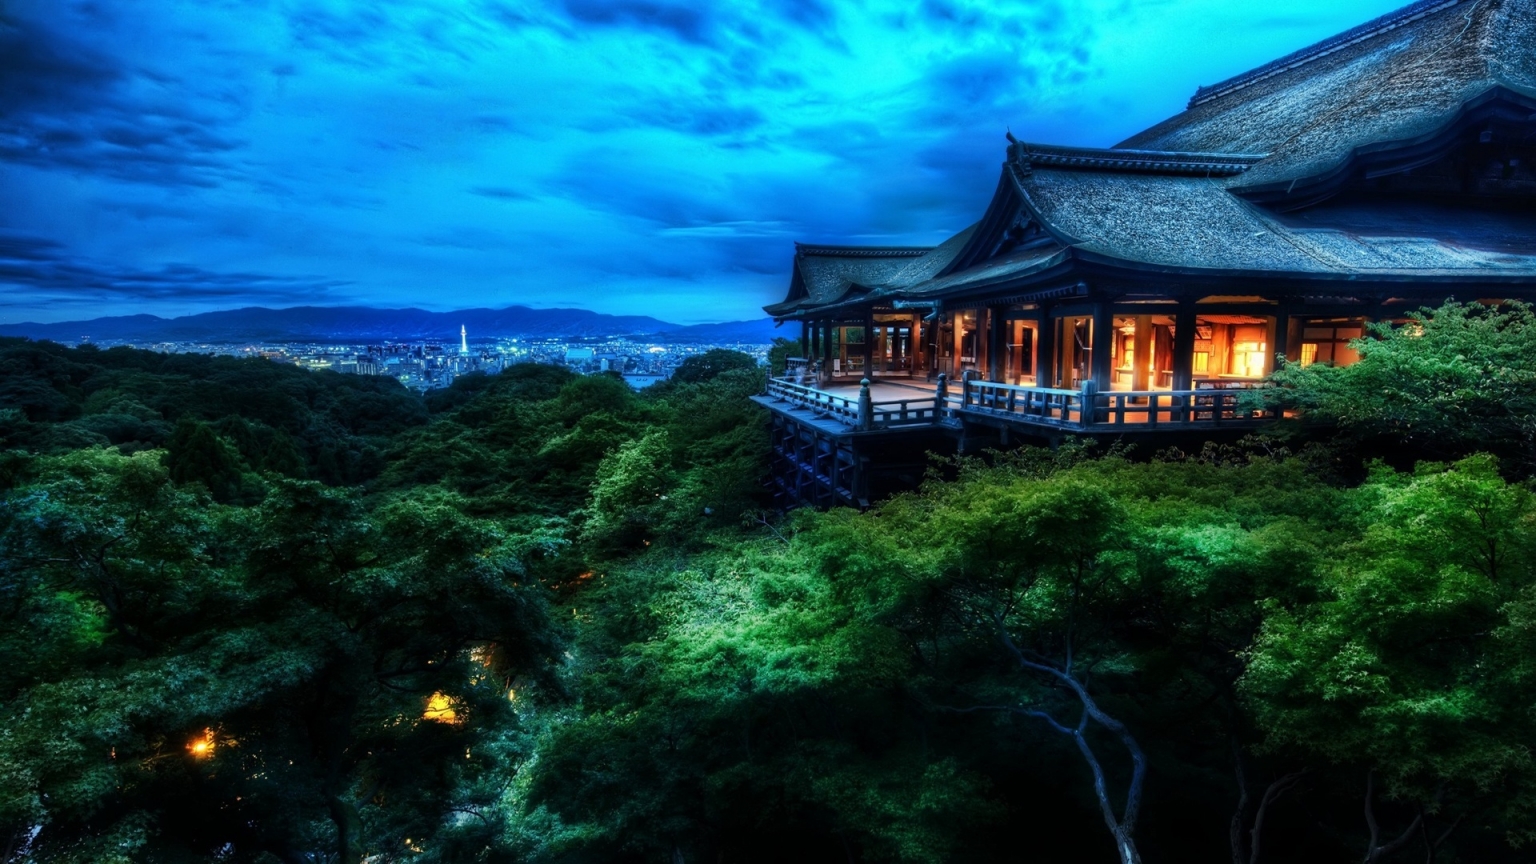 Kyoto Japan for 1536 x 864 HDTV resolution